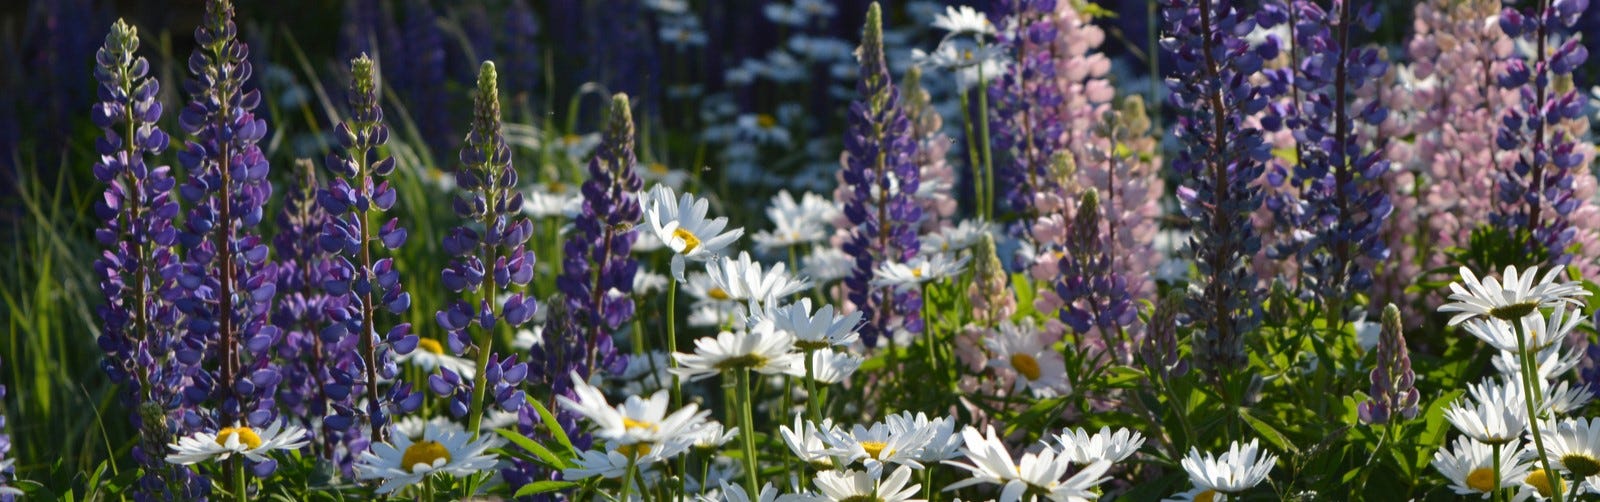 Daisies and Lupine flowers in bloom